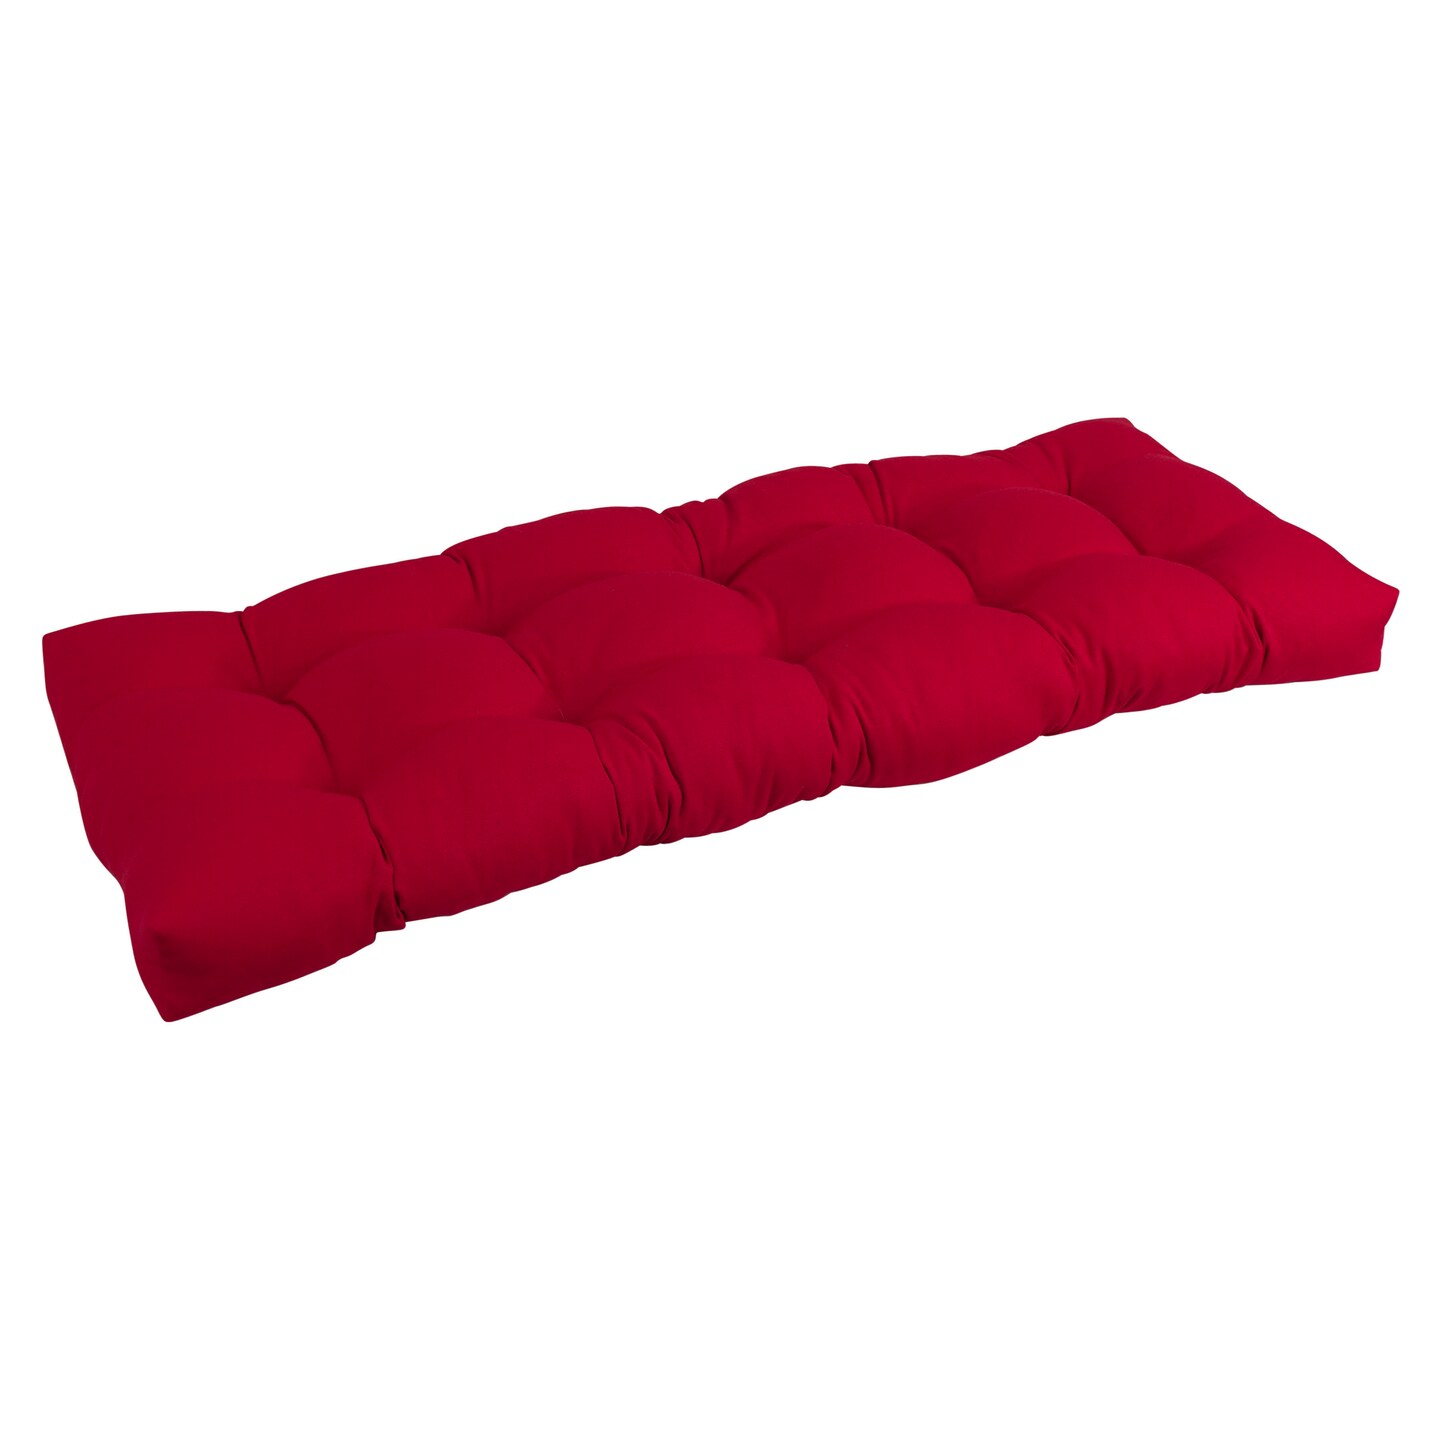 51-inch by 19-inch Tufted Solid Twill Bench Cushion Red-Color